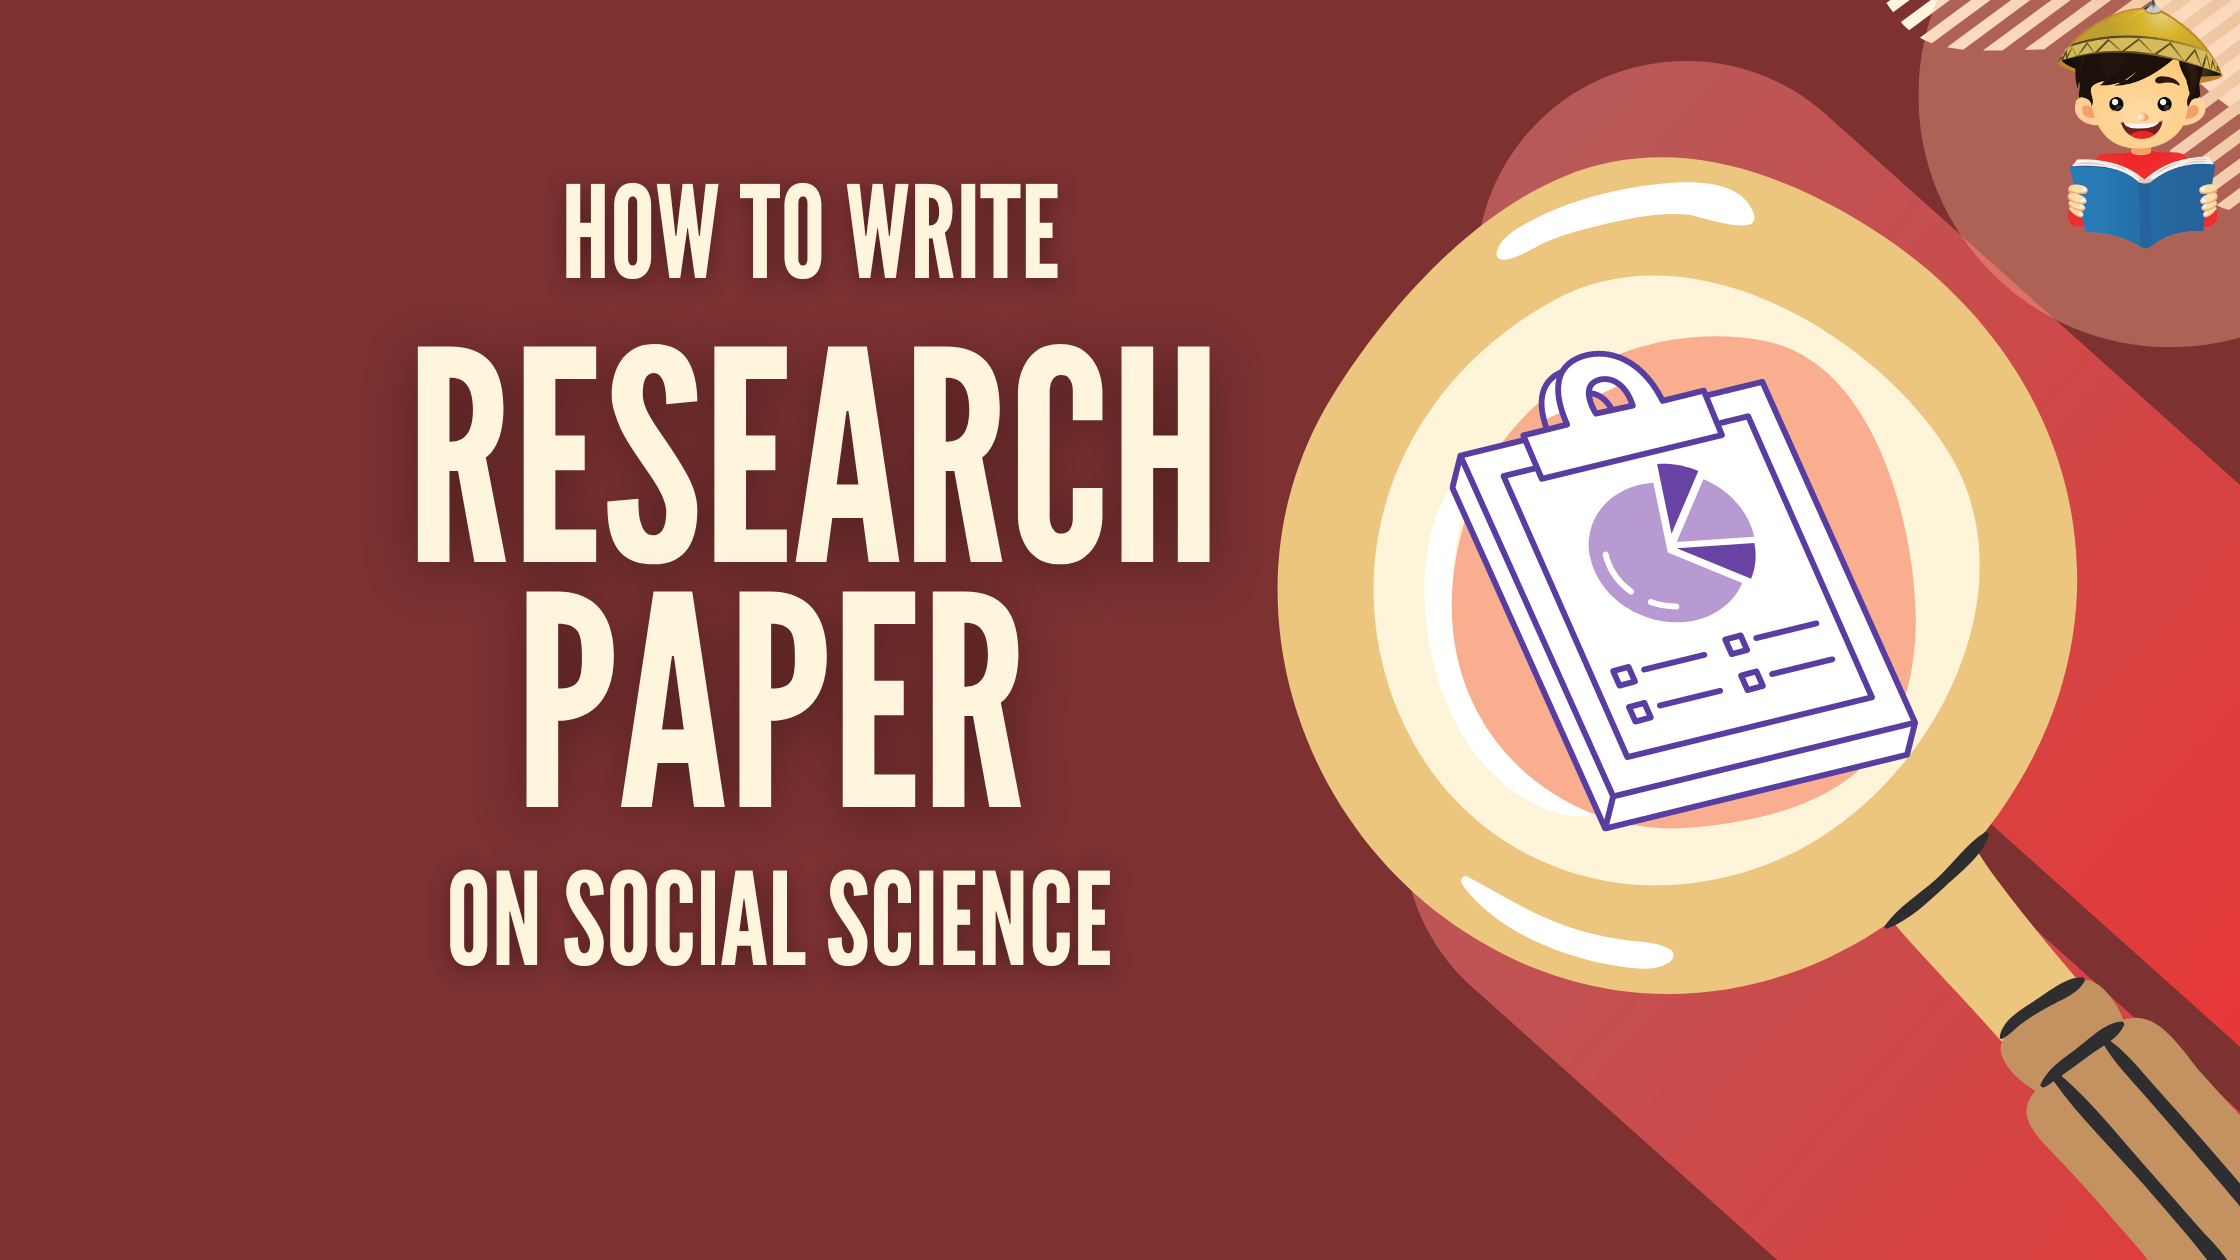 How To Write a Research Paper on Social Science?